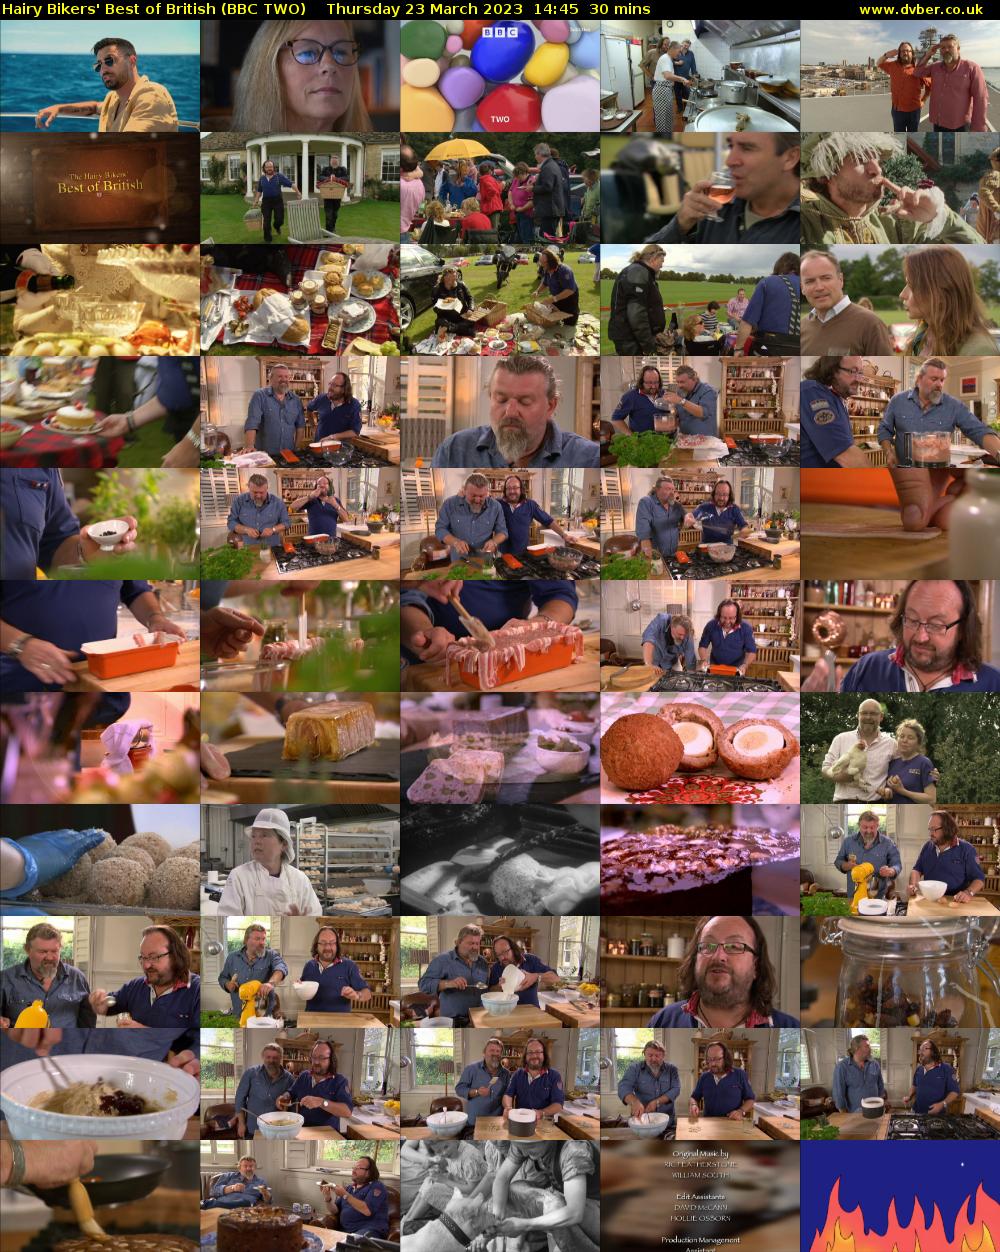 Hairy Bikers' Best of British (BBC TWO) Thursday 23 March 2023 14:45 - 15:15